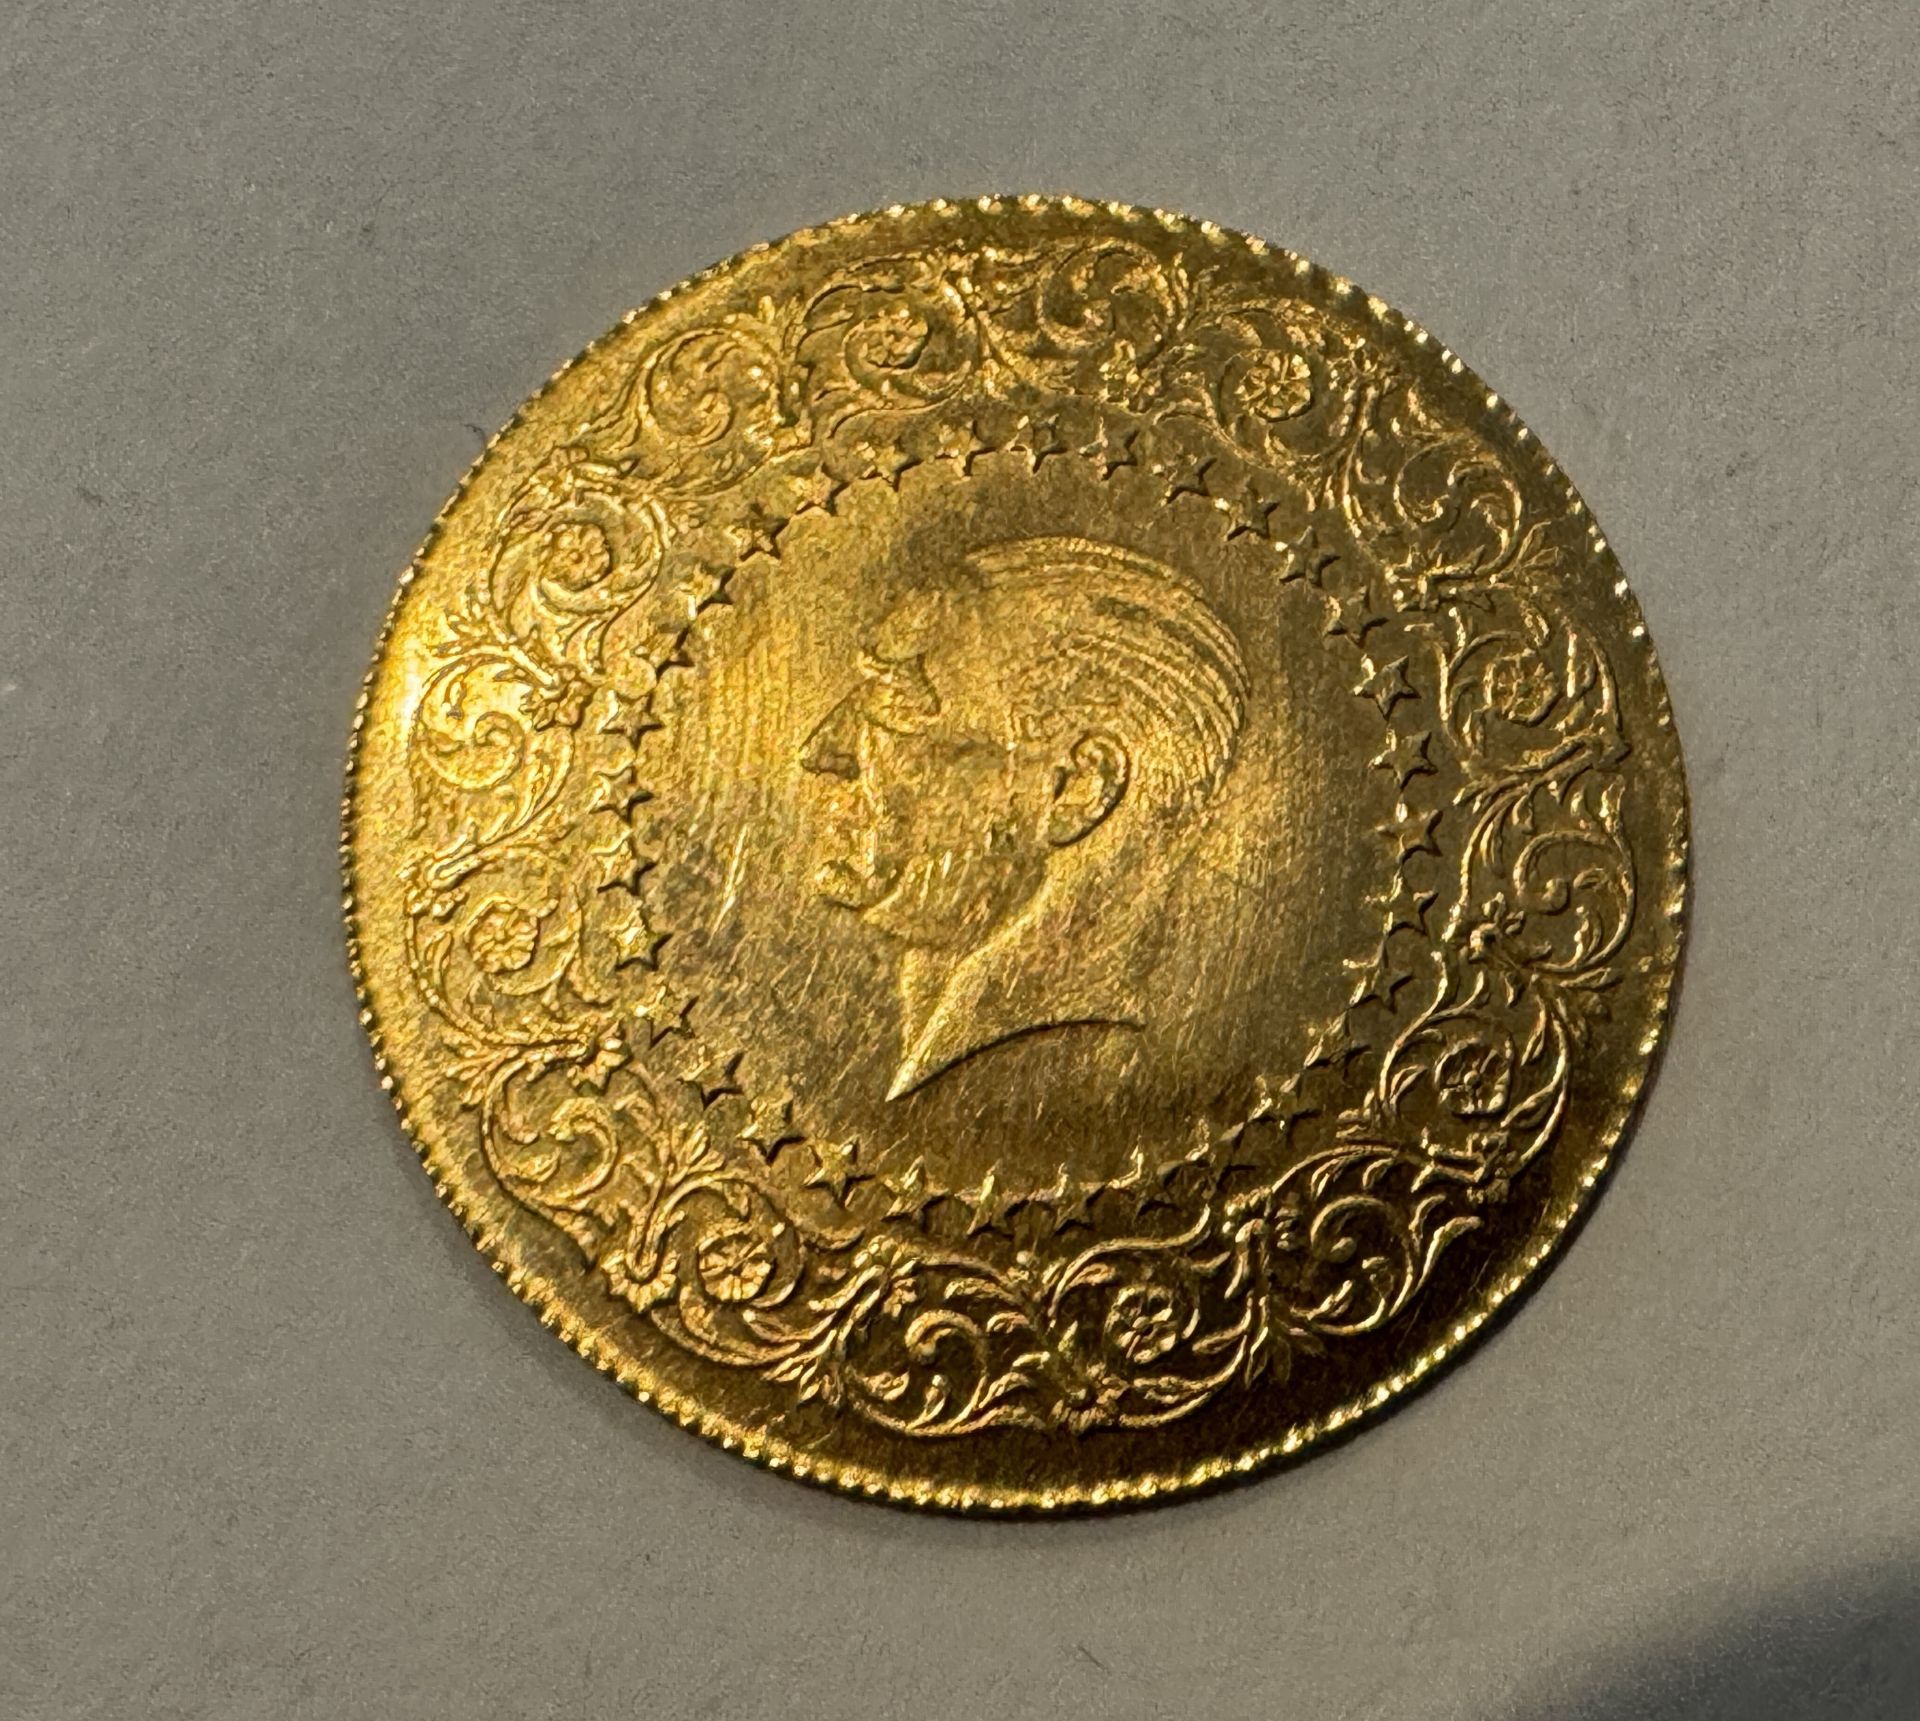 1969 KURUSH SOLID GOLD COIN - Image 2 of 2